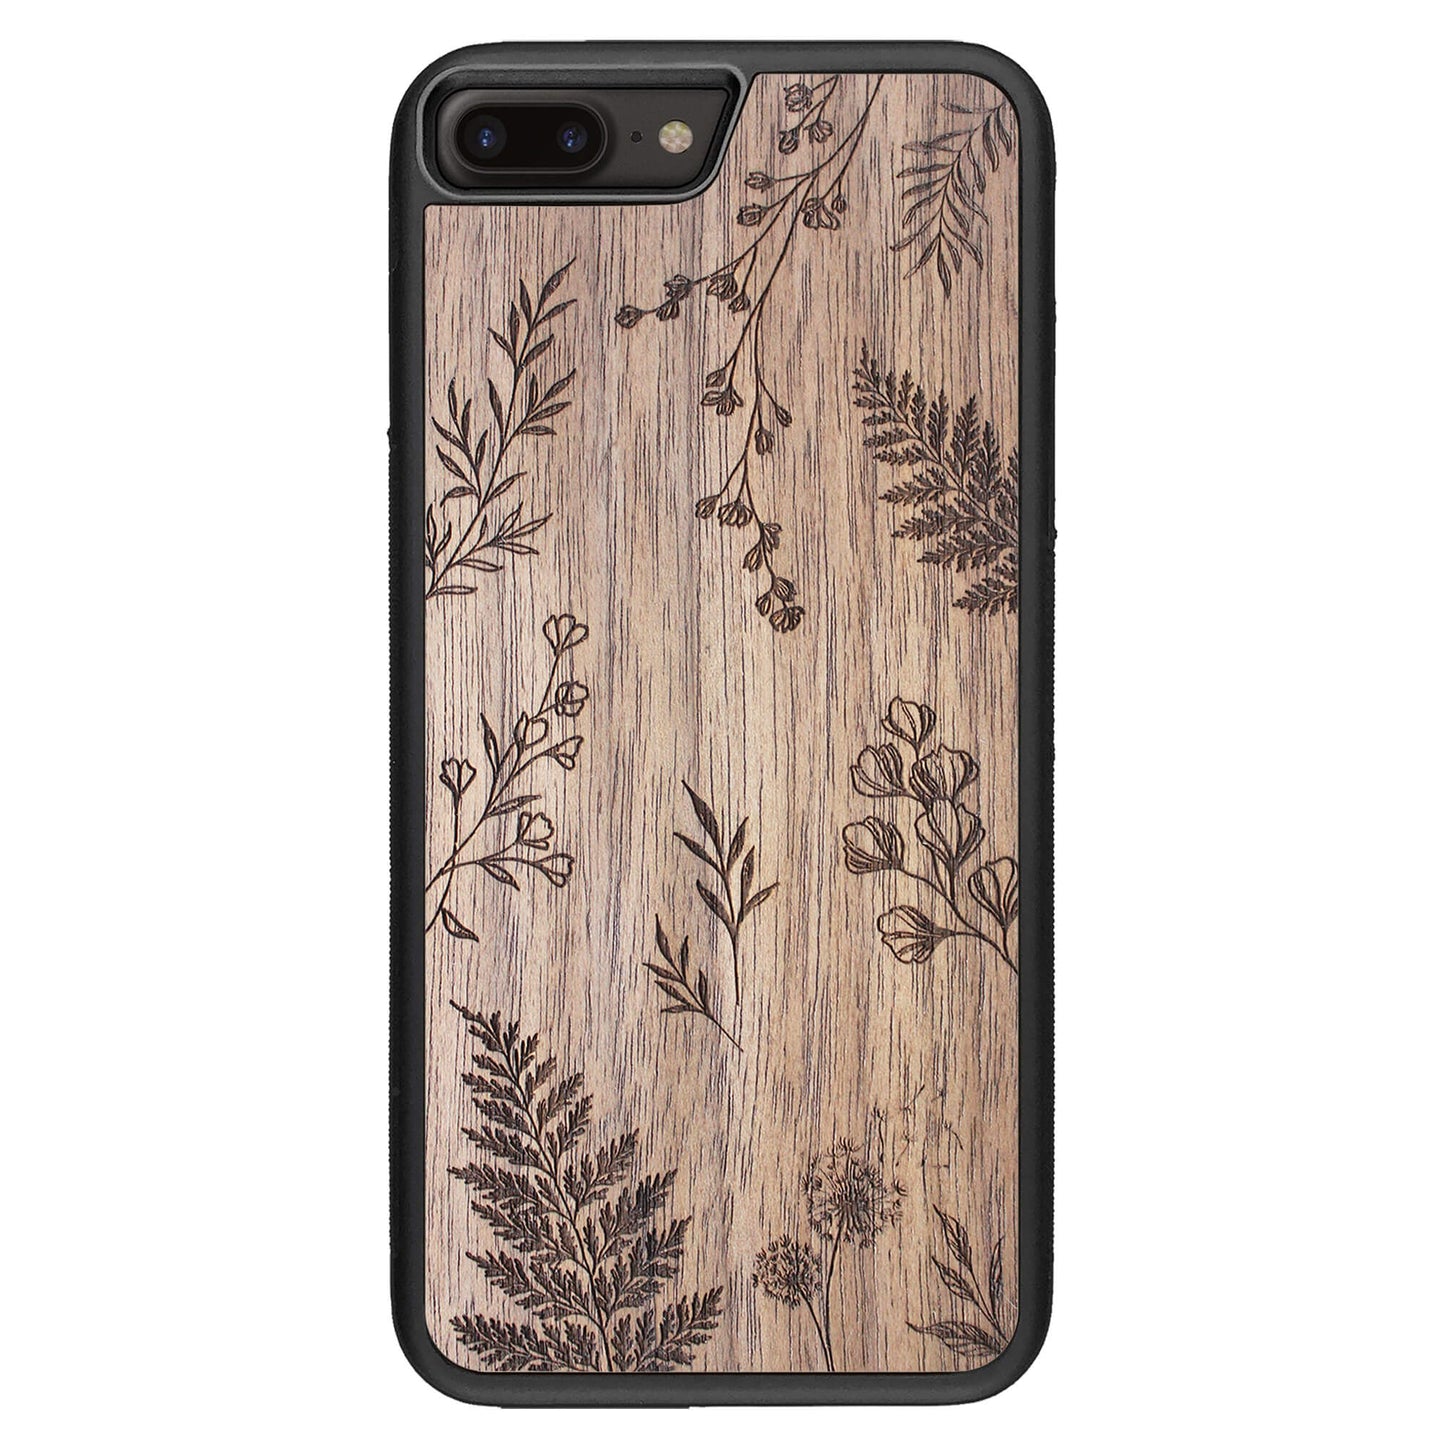 Wooden Case for iPhone 7 Plus Botanical